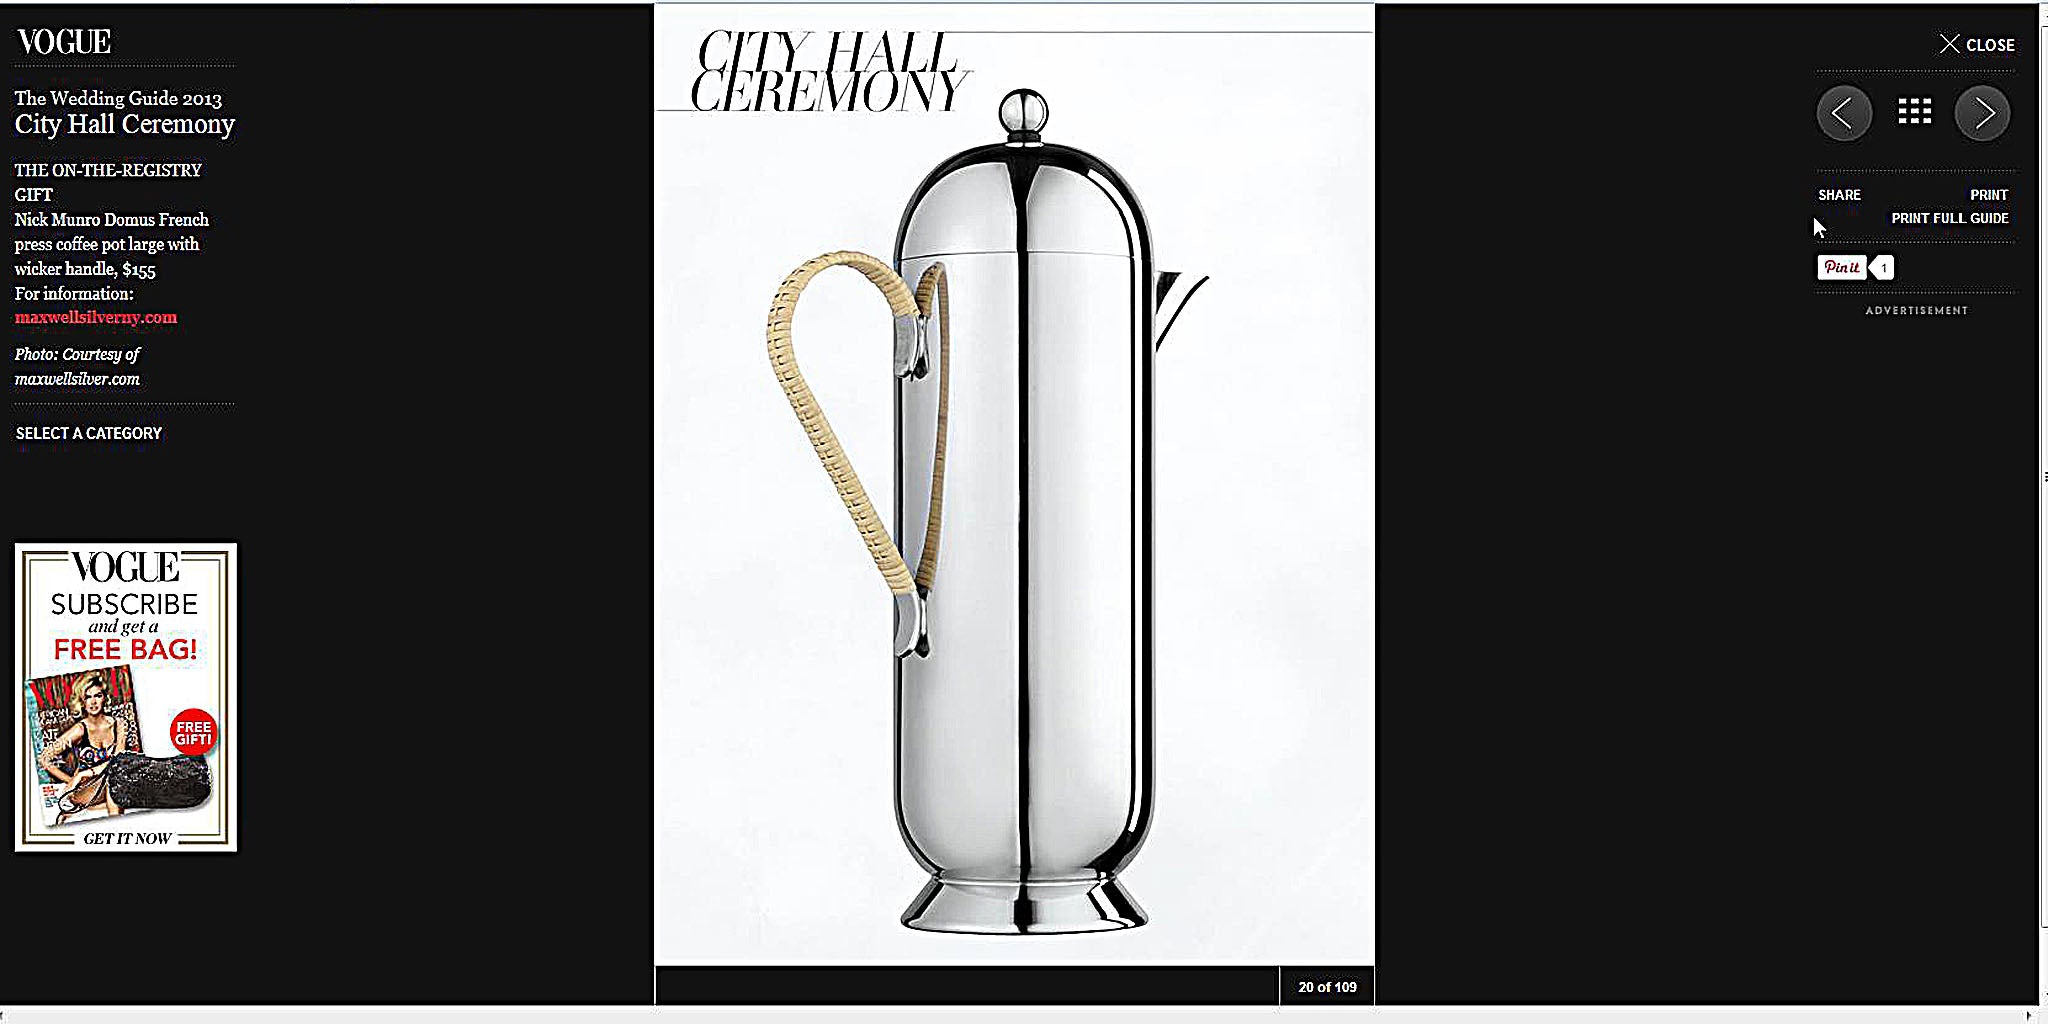 Vogue.com: The Wedding Guide 2013 City Hall Ceremony The On-The-Registry Gift: Nick Munro Domus French-Press Coffee Pot Large with Wicker Handle.